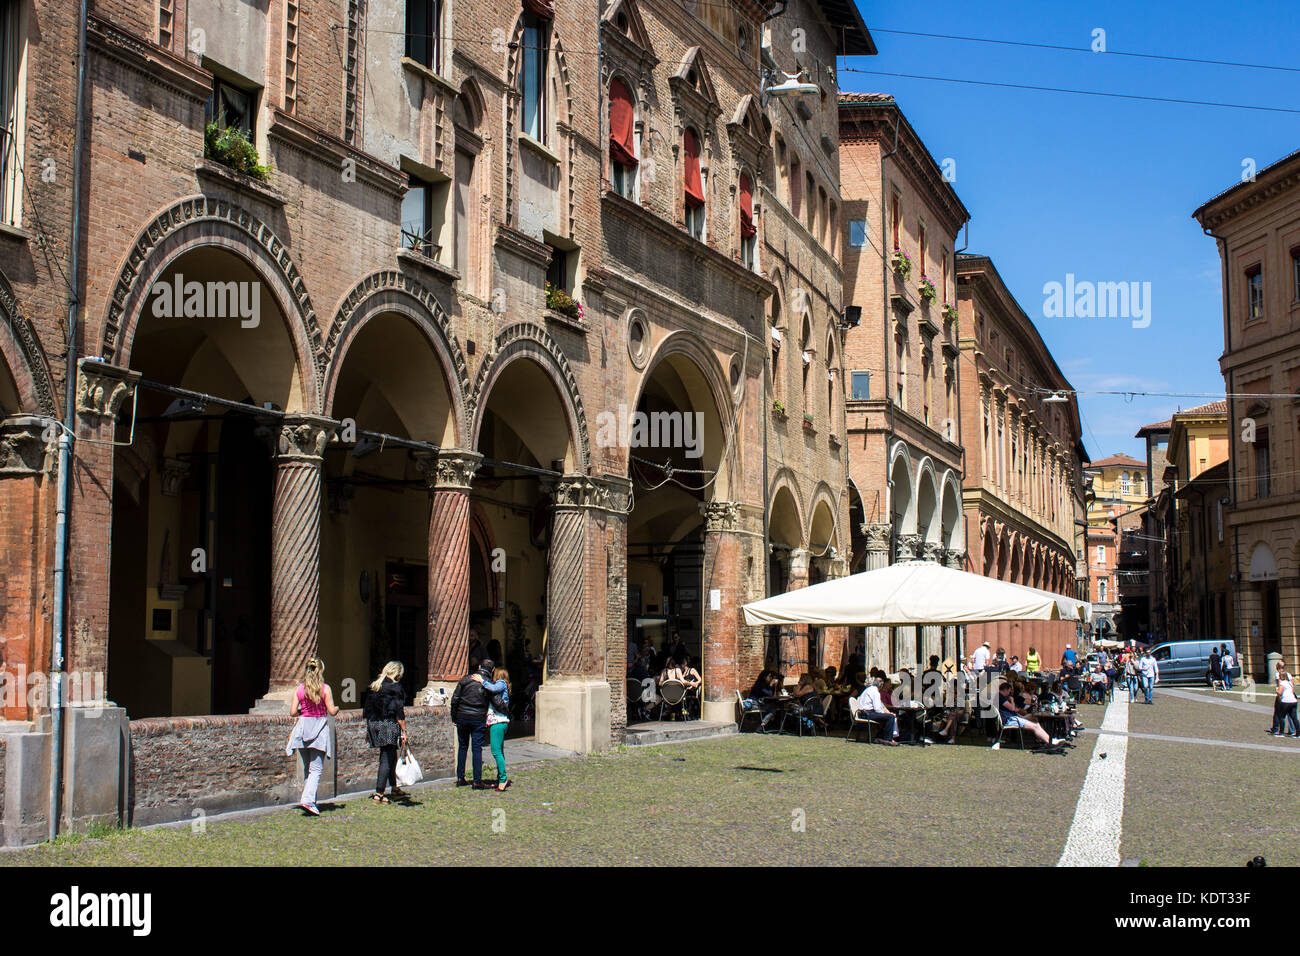 The Porticoes of the medieval city of Bologna, Italy, part of the Unesco Tentative Lists for World Heritage Site. Stock Photo